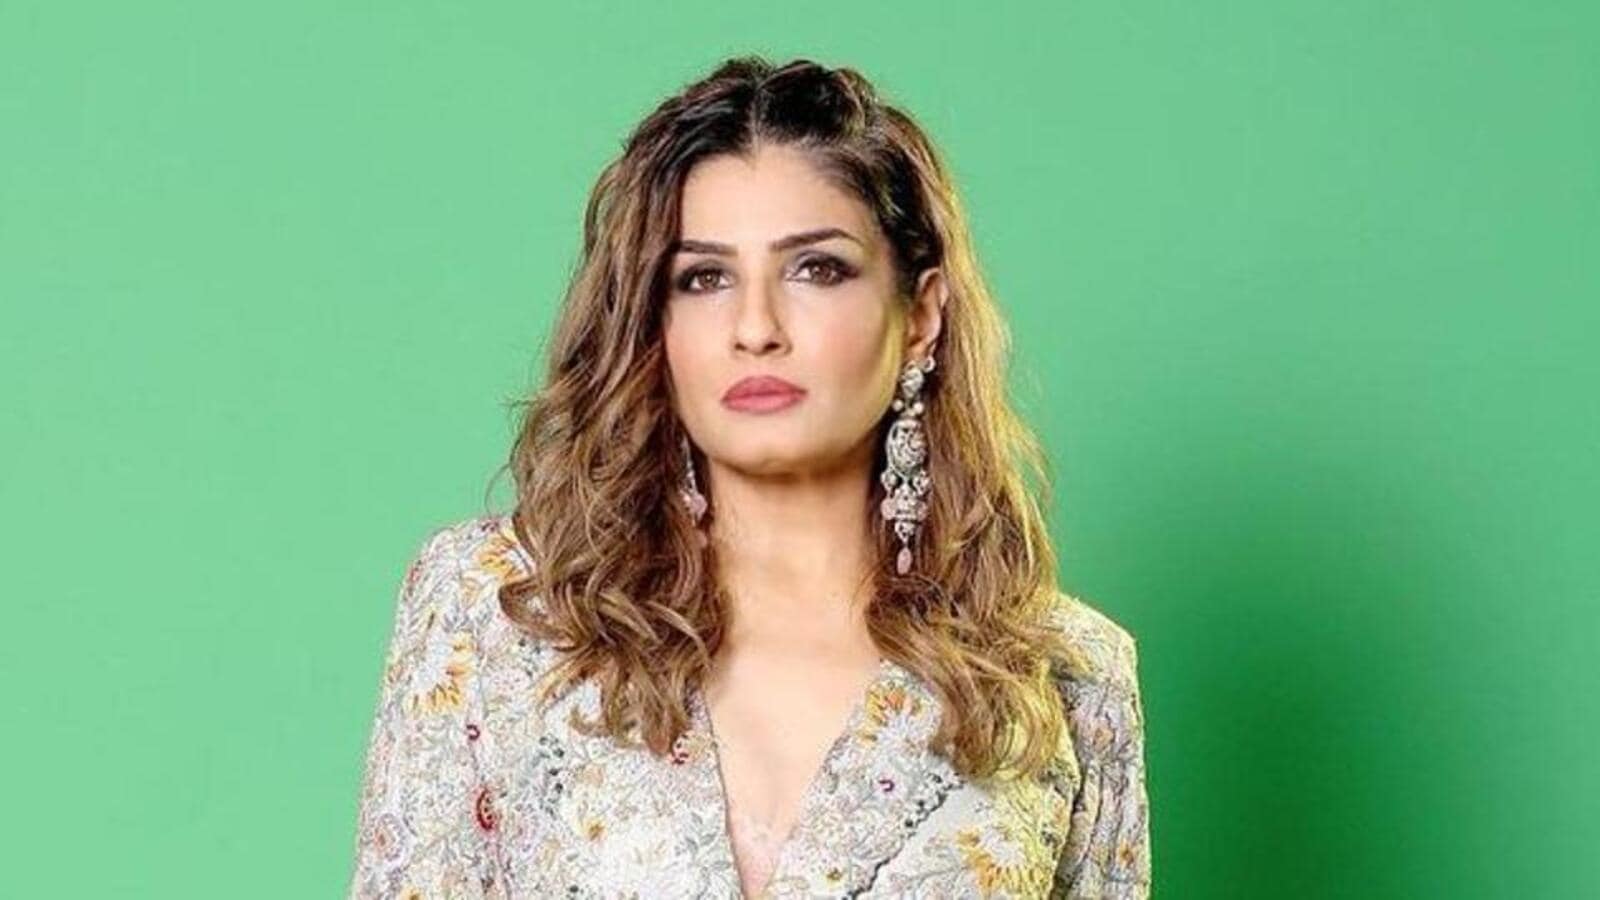 EXCLUSIVE| Raveena Tandon on her Padma Shri: It’s unbelievable, I have never worked for awards, they happened for me